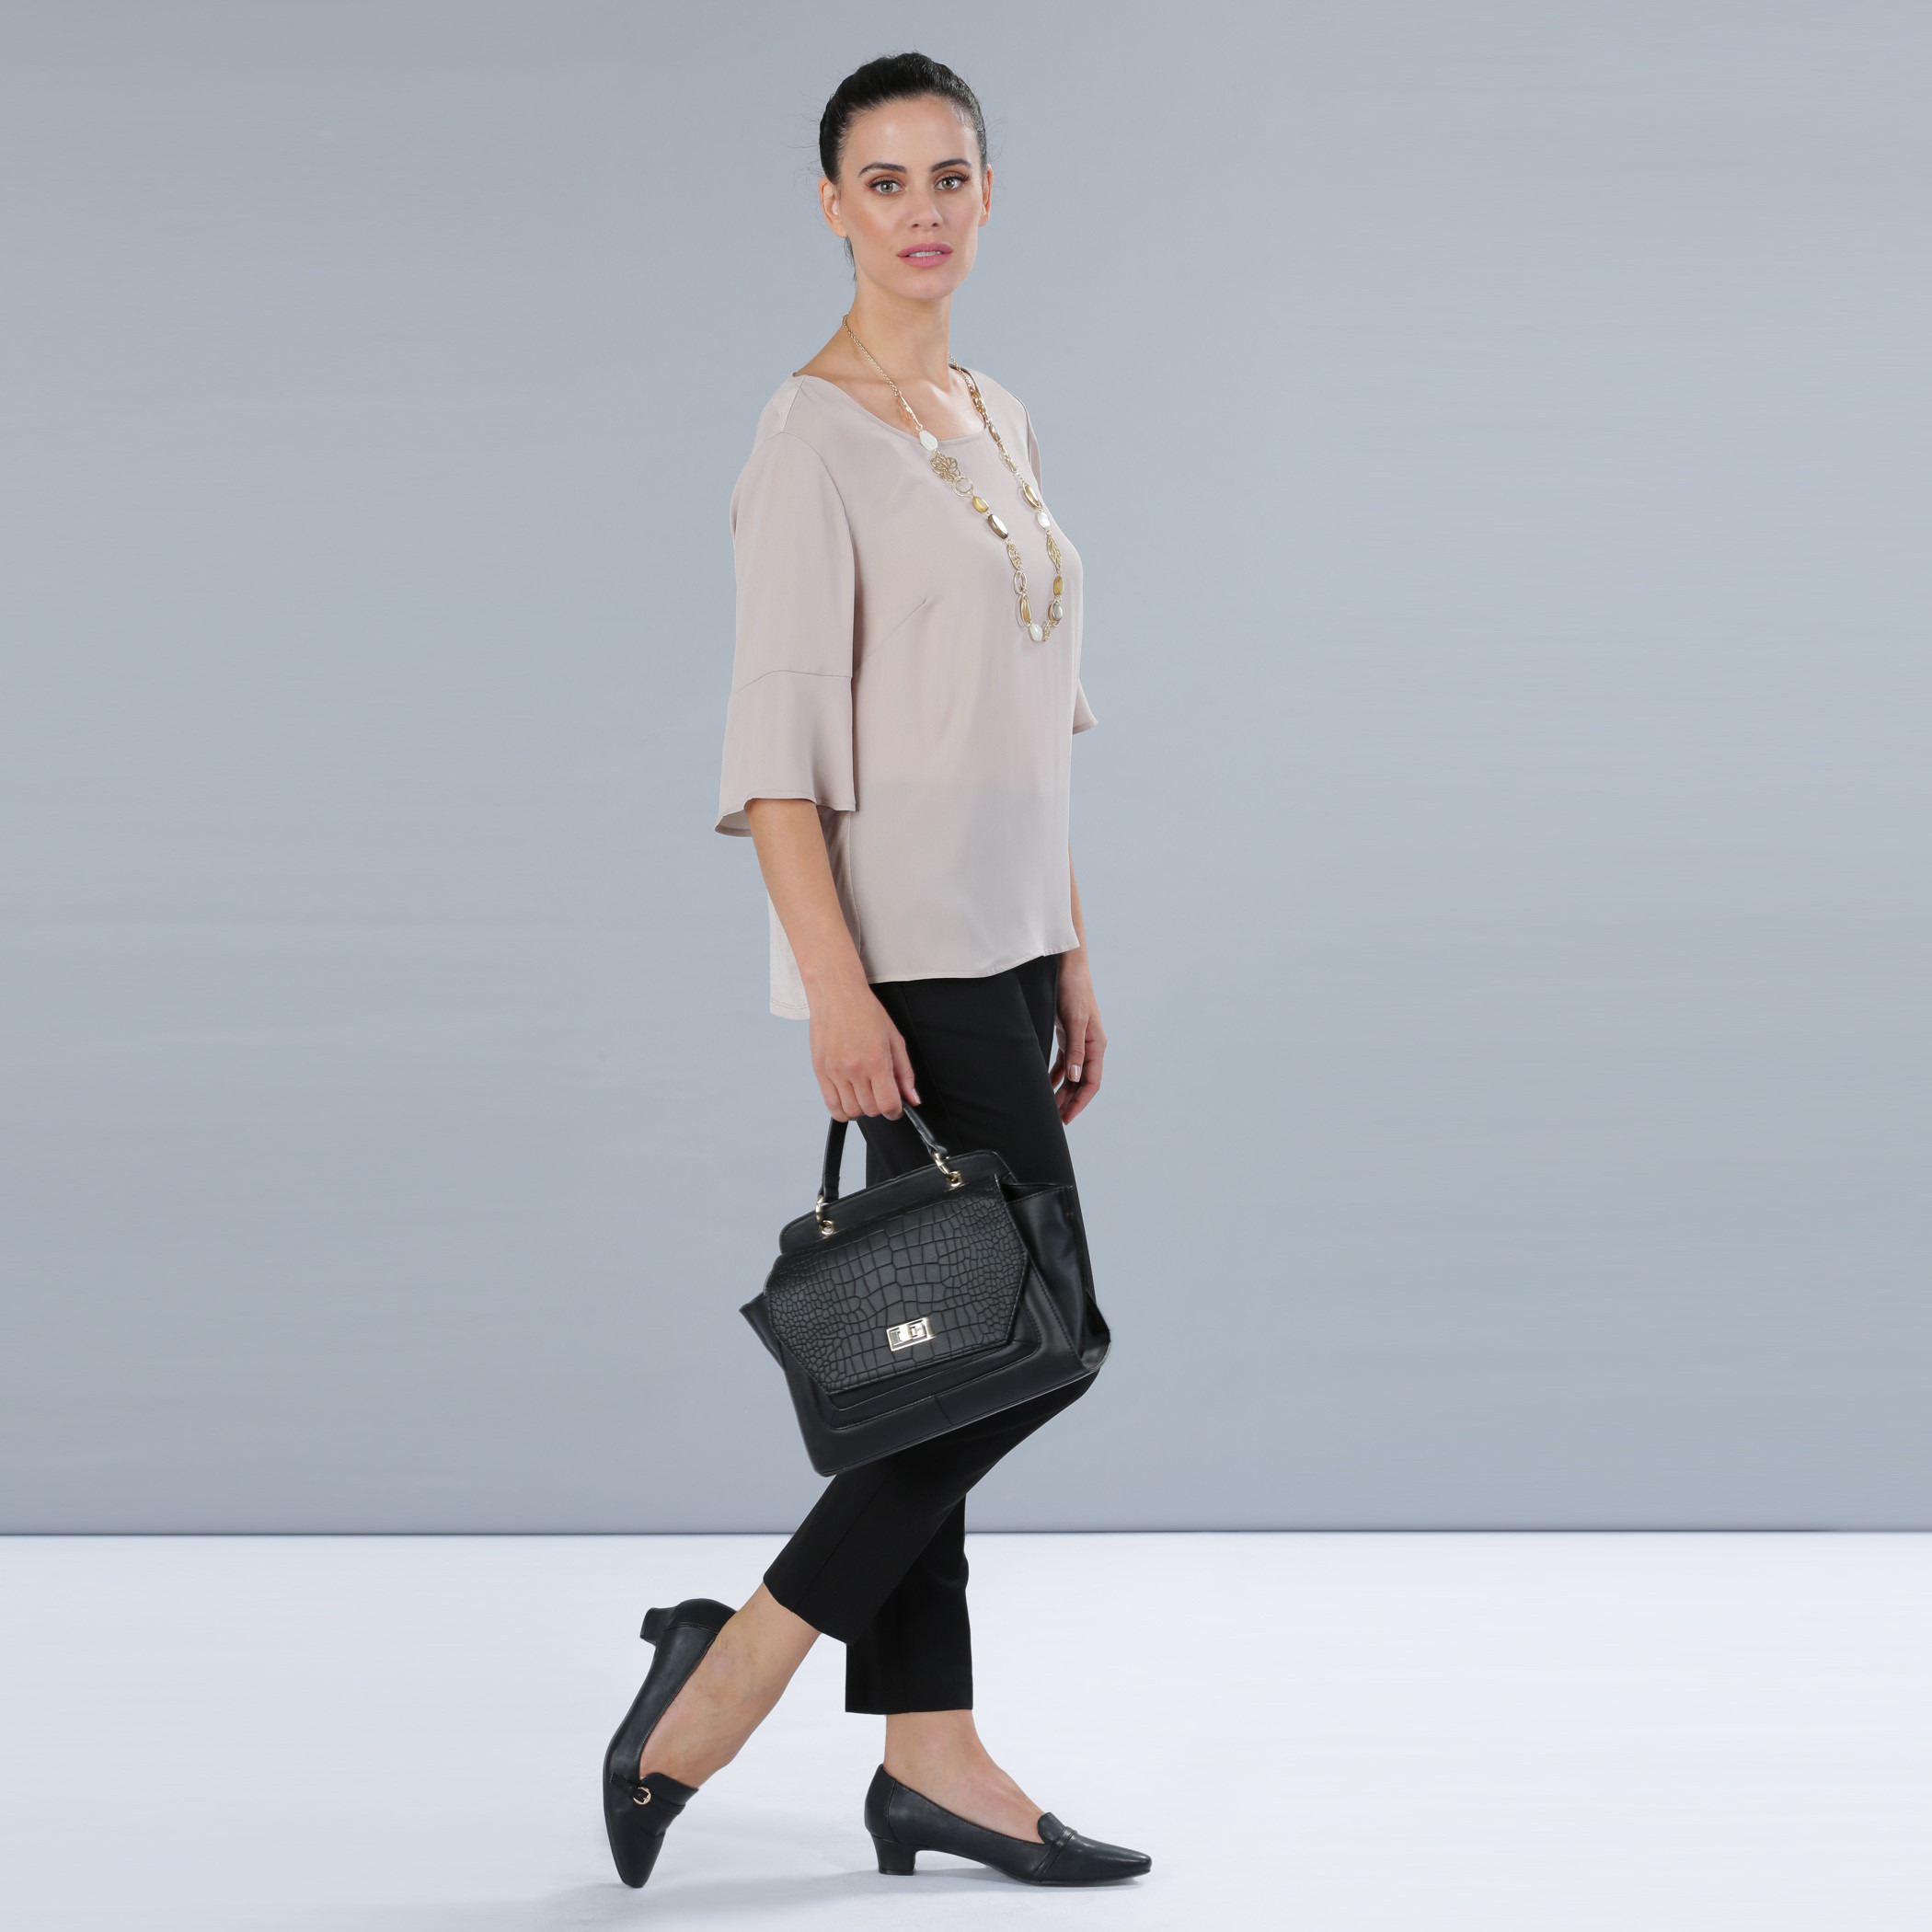 Buy Black Trousers & Pants for Women by MAX Online | Ajio.com